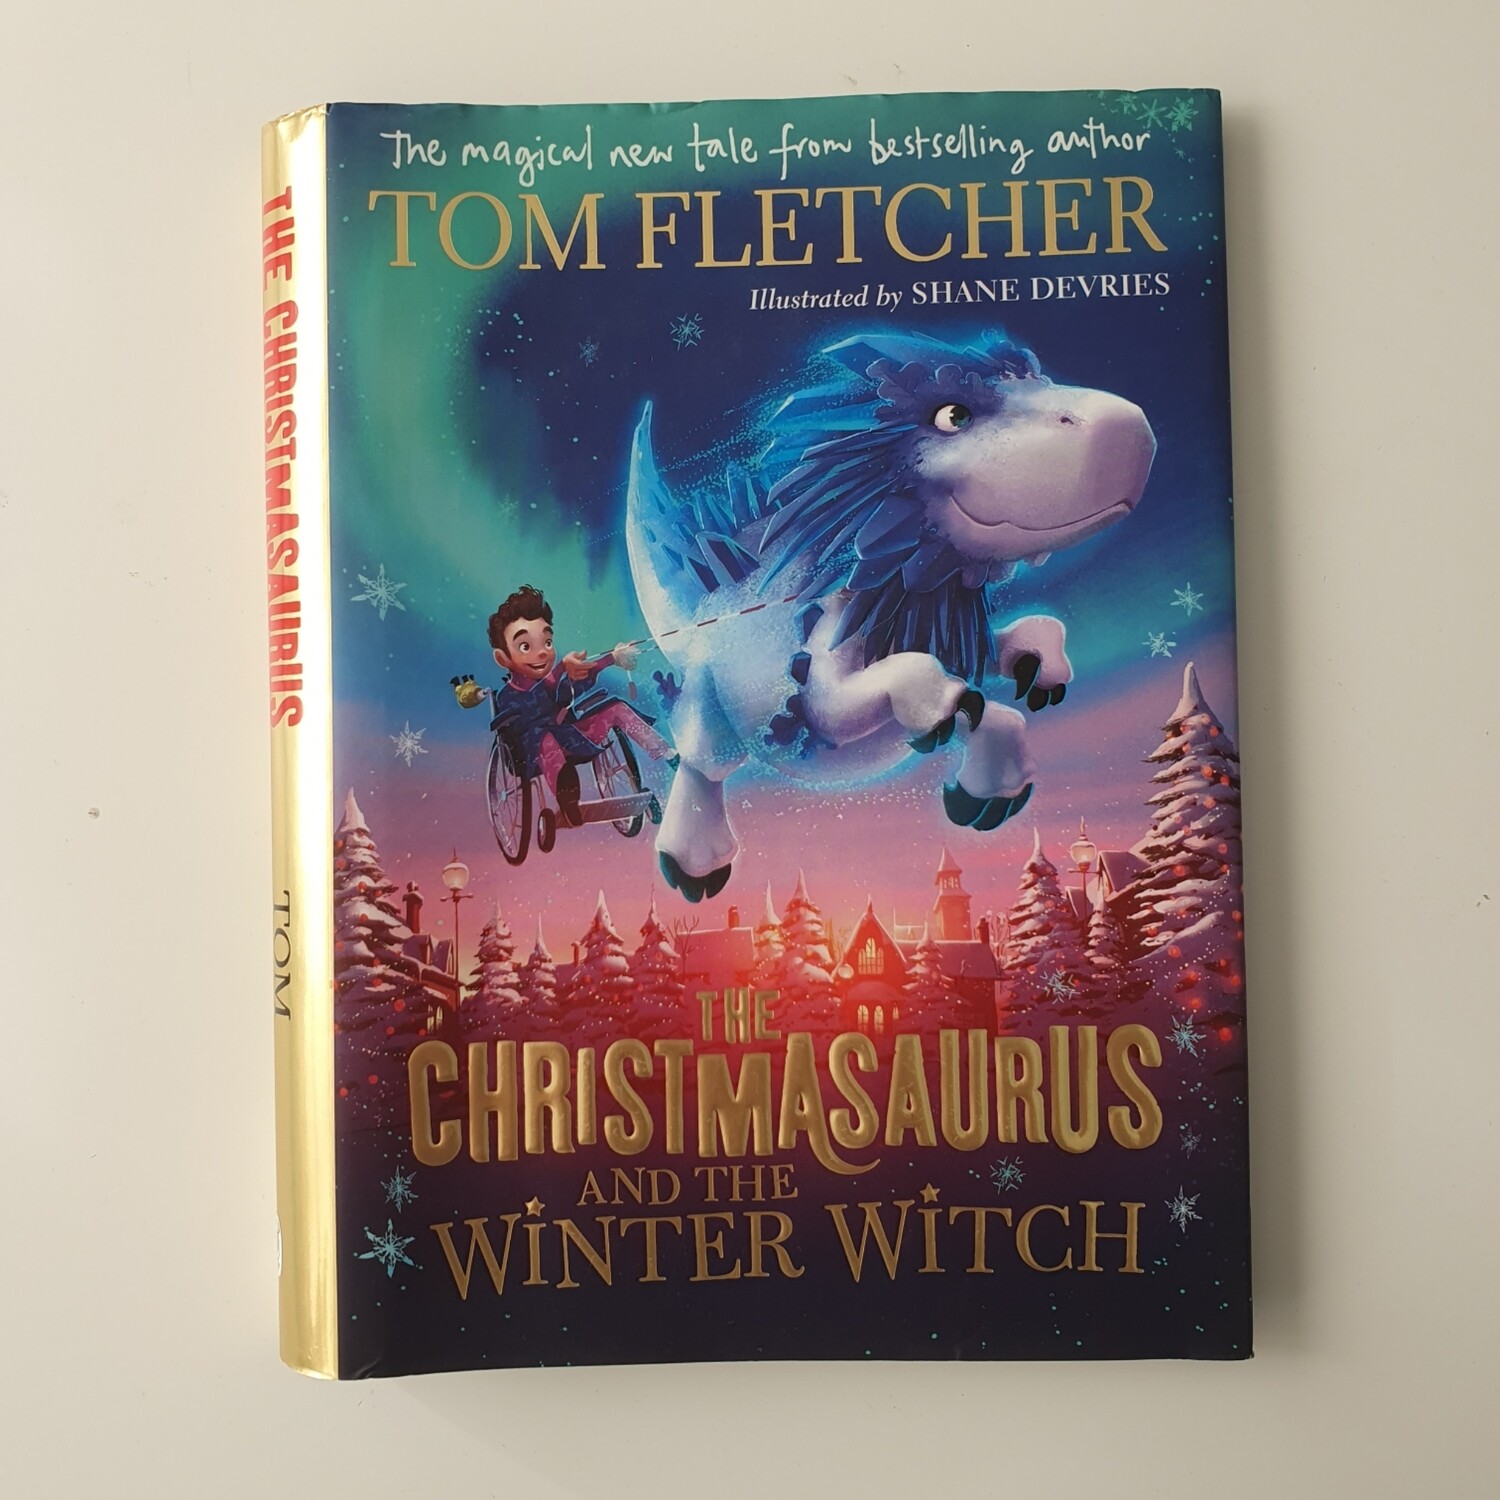 The Christmasaurus and the Winter Witch - Made from a dust jacket